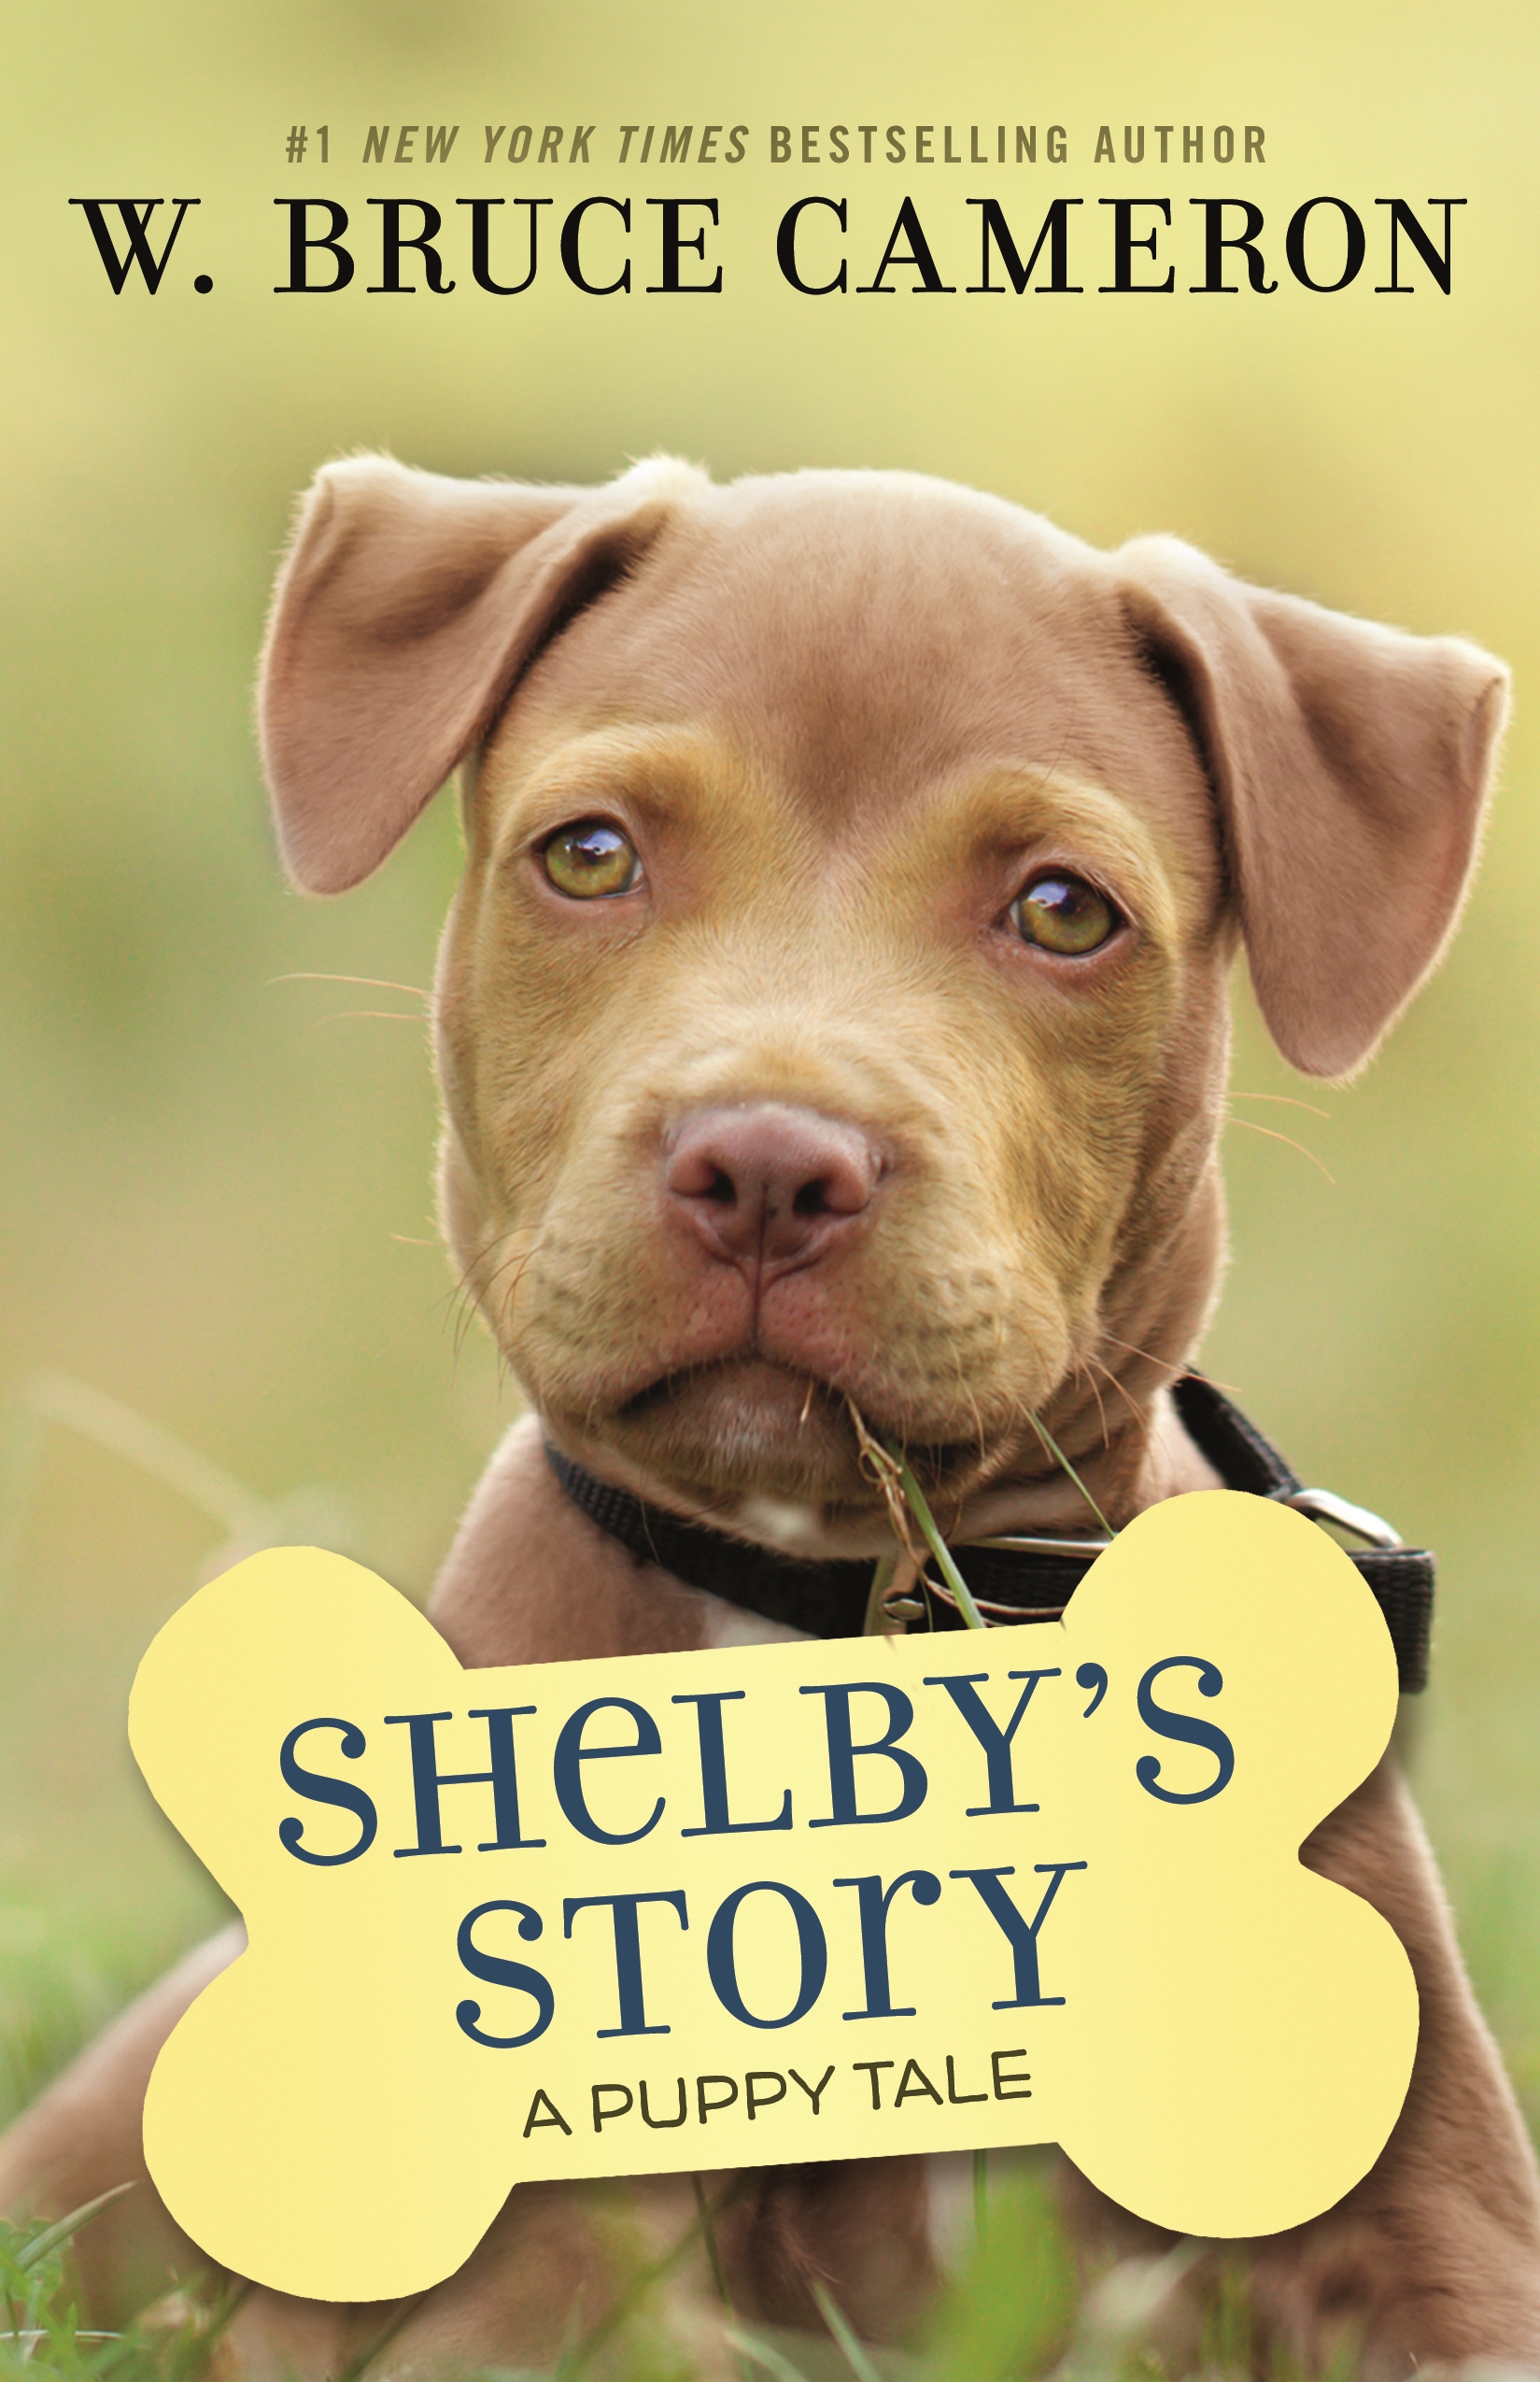 Shelby's Story : A Puppy Tale by W. Bruce Cameron